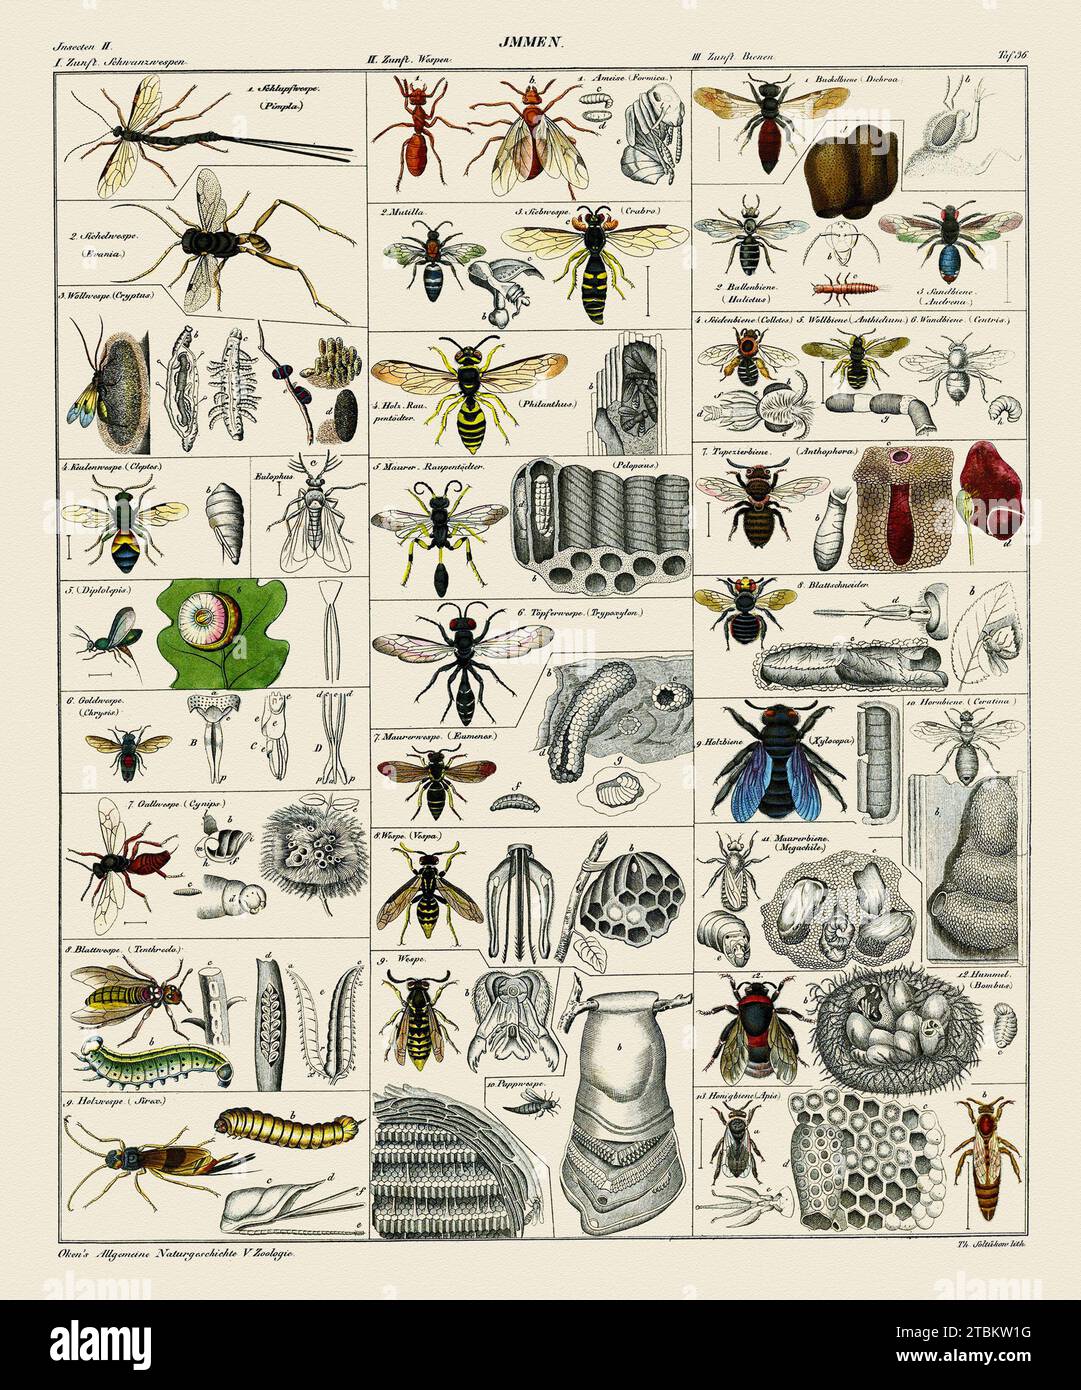 'From Oken's Allegemeine Naturgeschichte V Zoologie. C. Schach Lith. This is a beautiful antique German lithograph, hand colored, from ''Okens Allgemeine Naturgeschichte V Zoologie'', by Lorenz Oken, 1843, printed by Hoffmannssche Verlage, Stuttgart. This print displays different types of wasps and bees. Etched by C. Schach. German chart of Bees and Wasps and their life cycles.' Stock Photo